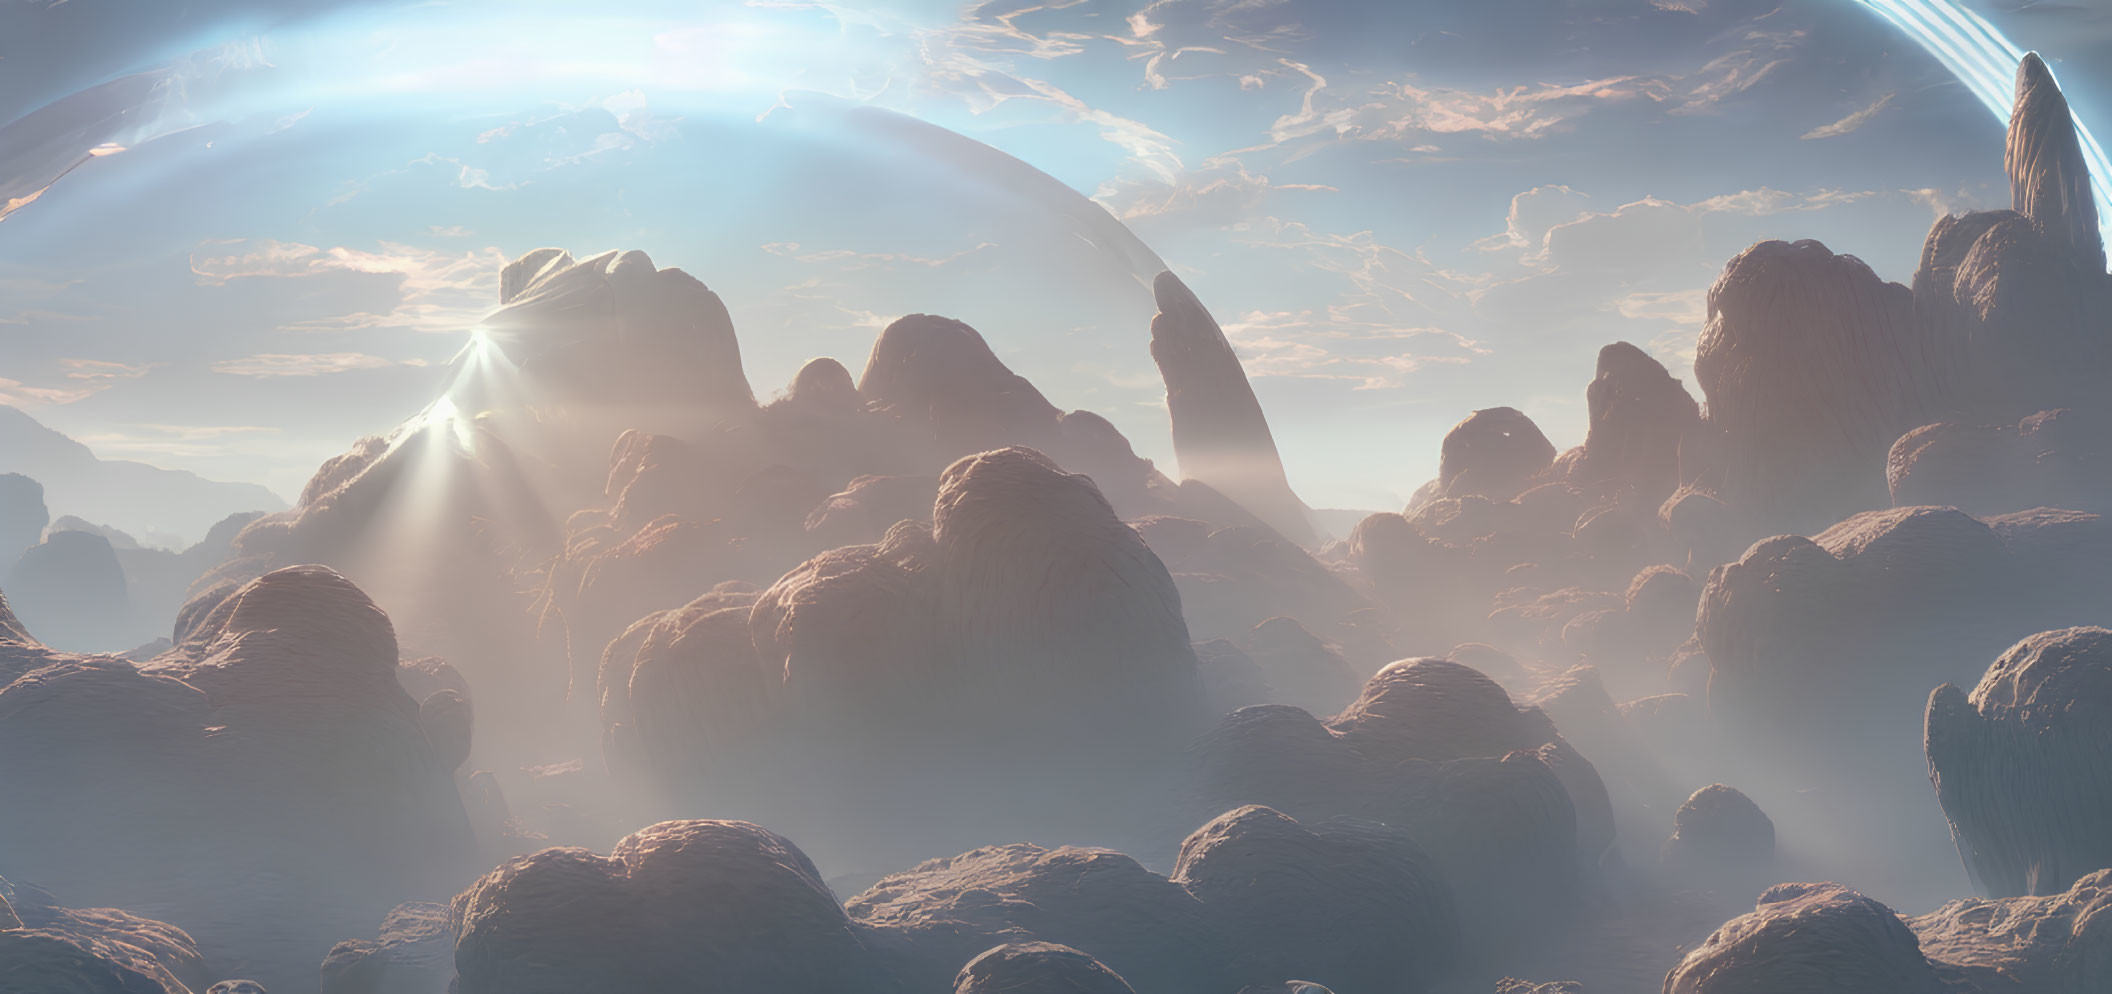 Misty mountains and ringed planet in serene landscape